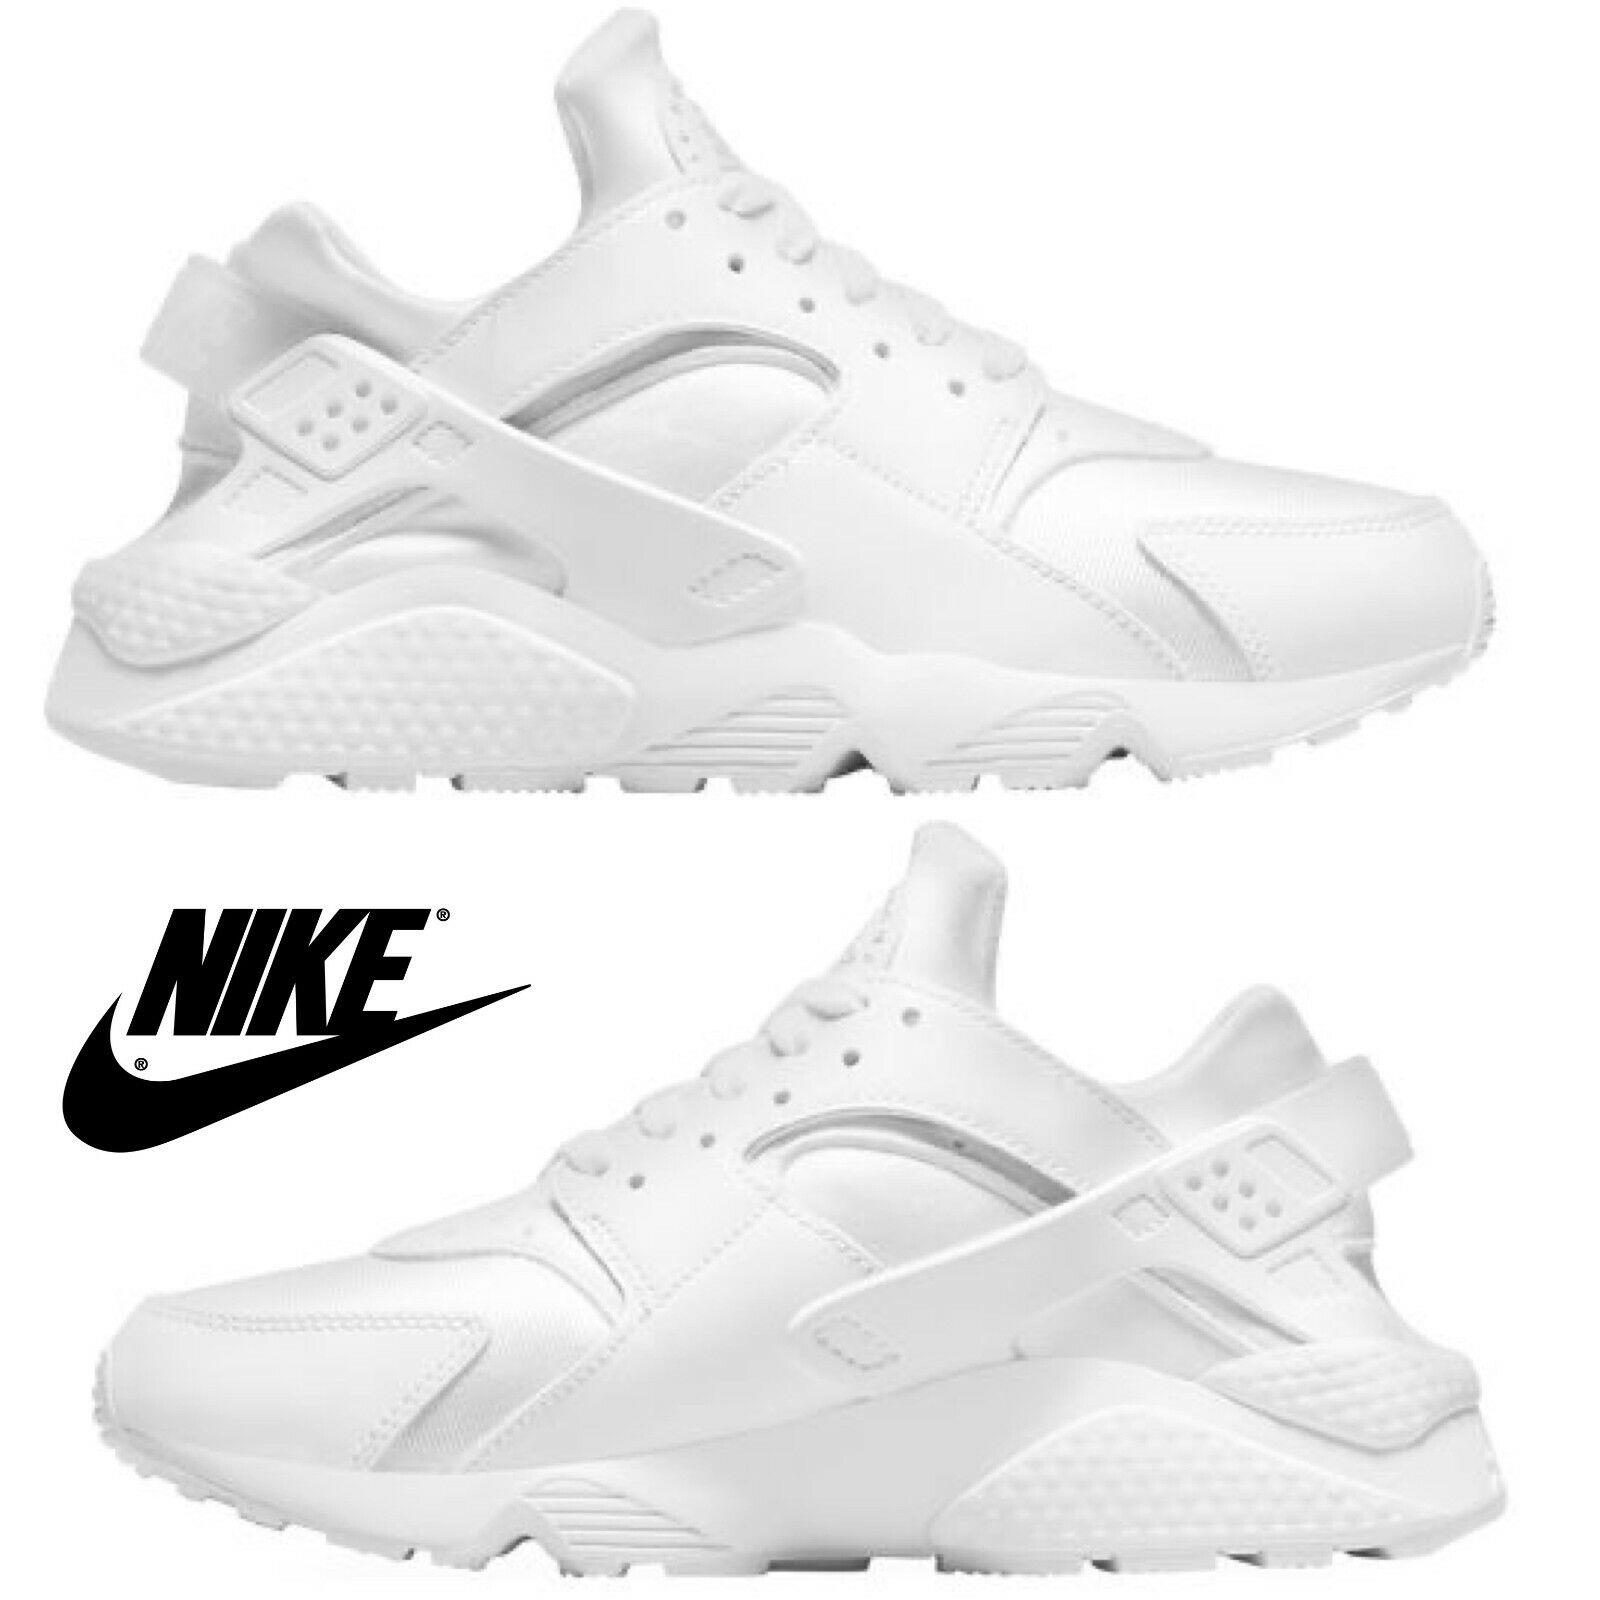 Nike Air Huarache Women`s Casual Shoes Running Athletic Comfort Sport Black - White , White/Pure Platinum Manufacturer